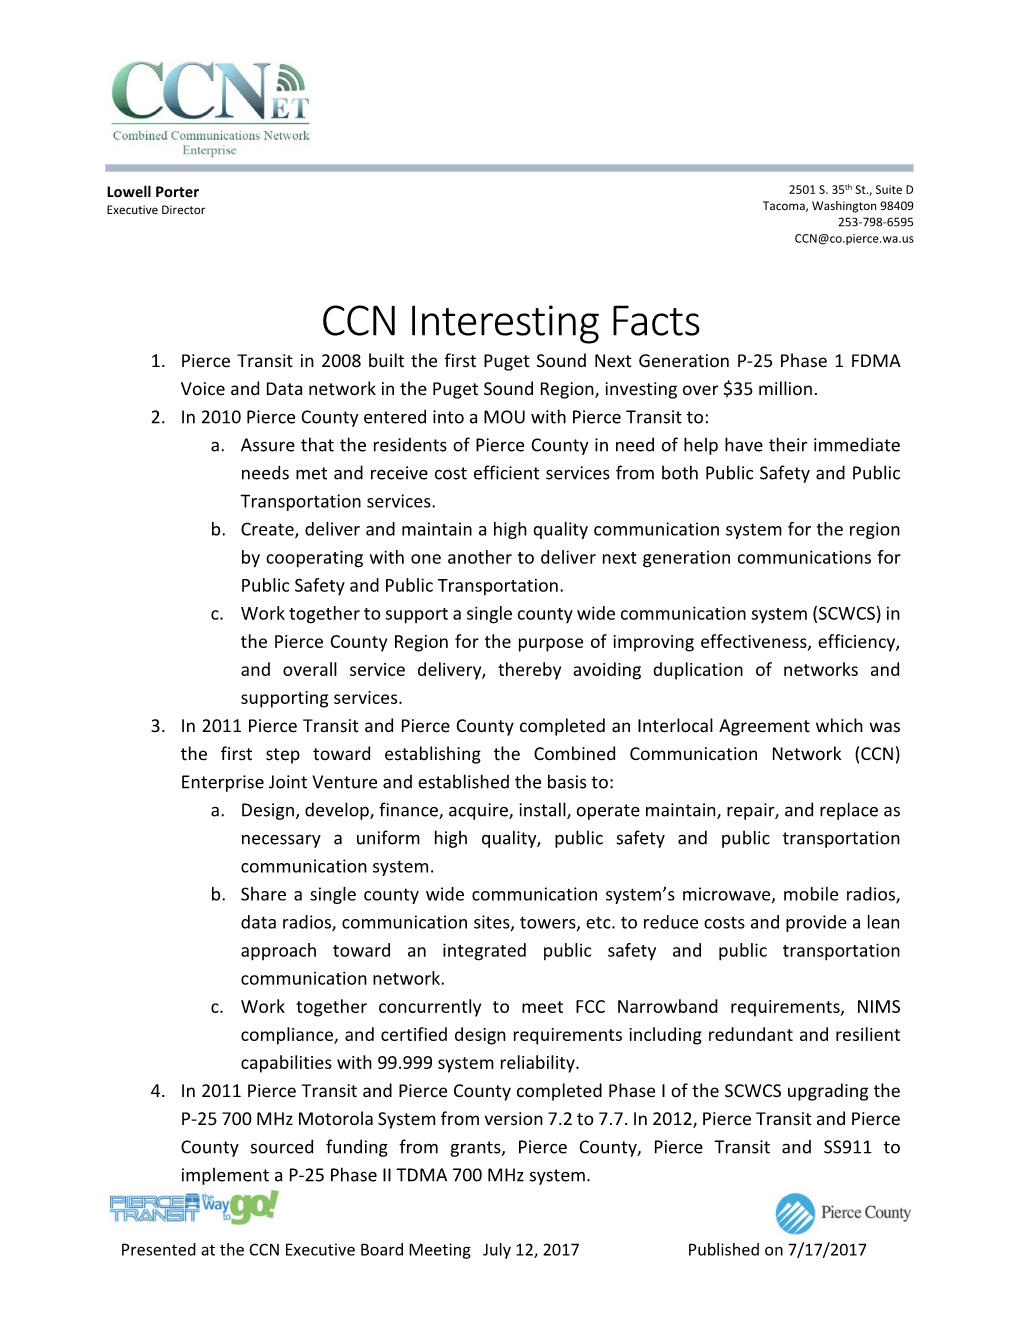 CCN Interesting Facts 1